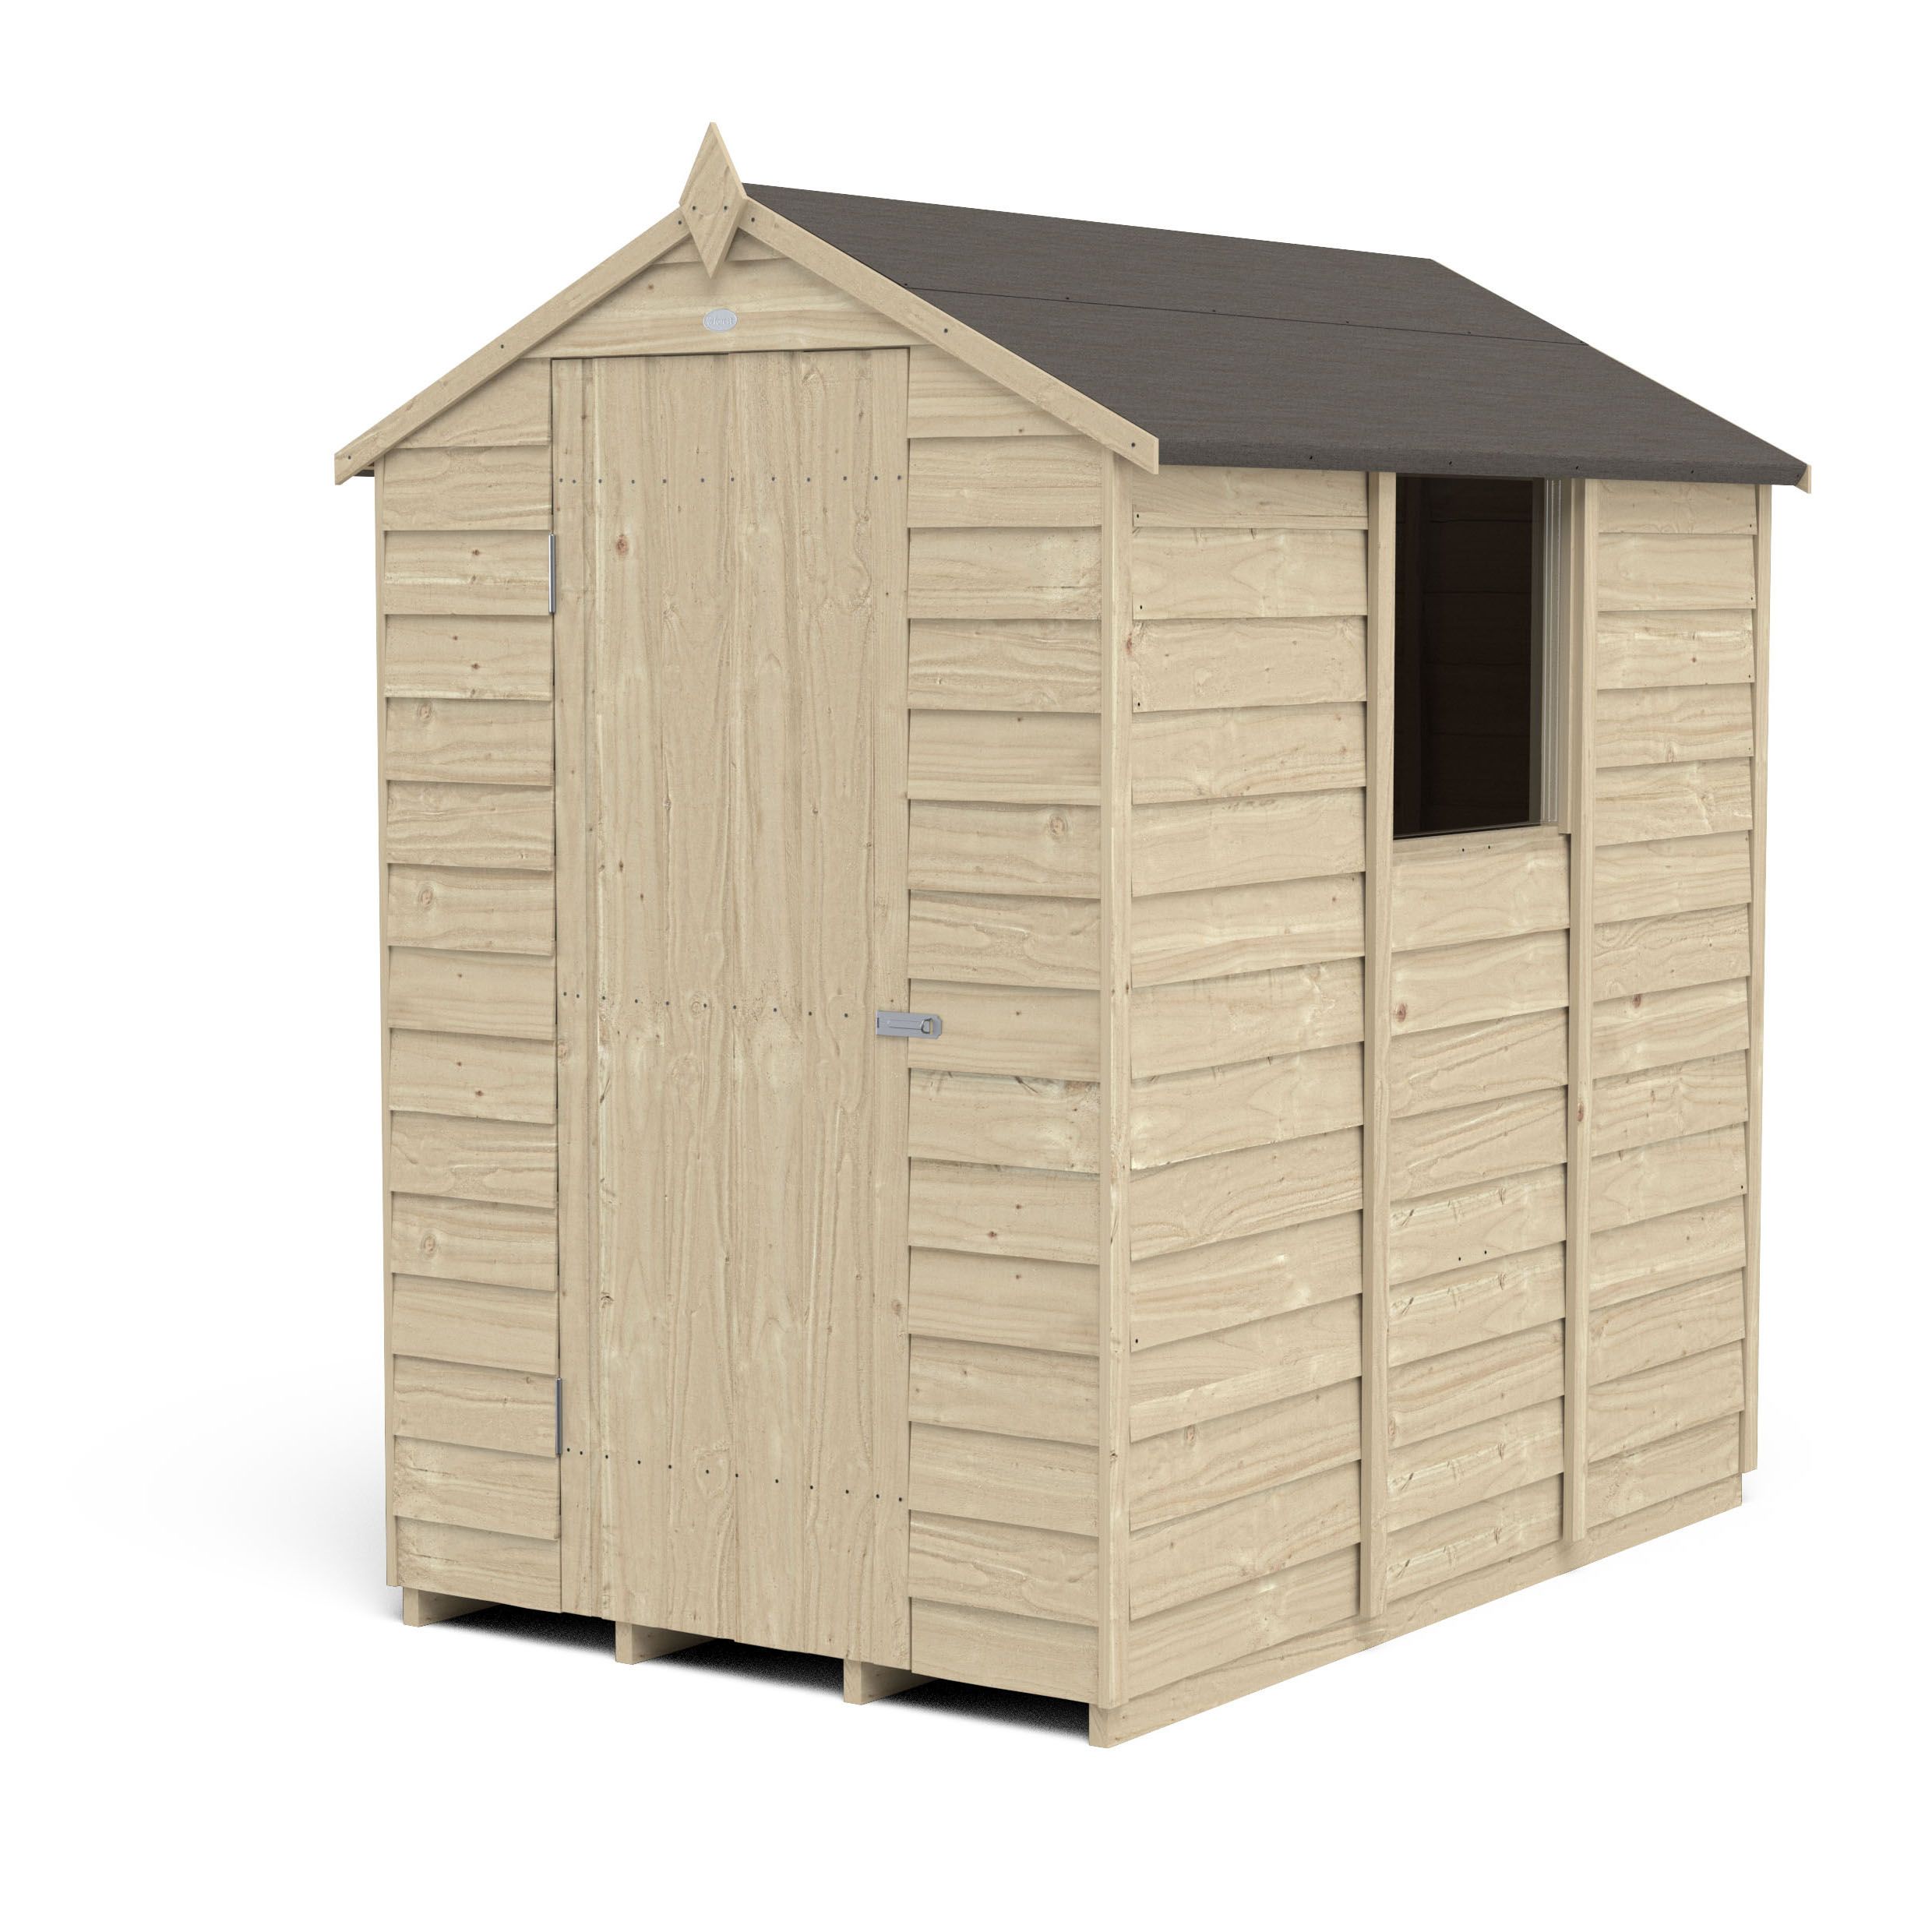 Forest Garden Overlap 6x4 ft Apex Wooden Pressure treated Shed with floor & 1 window (Base included)